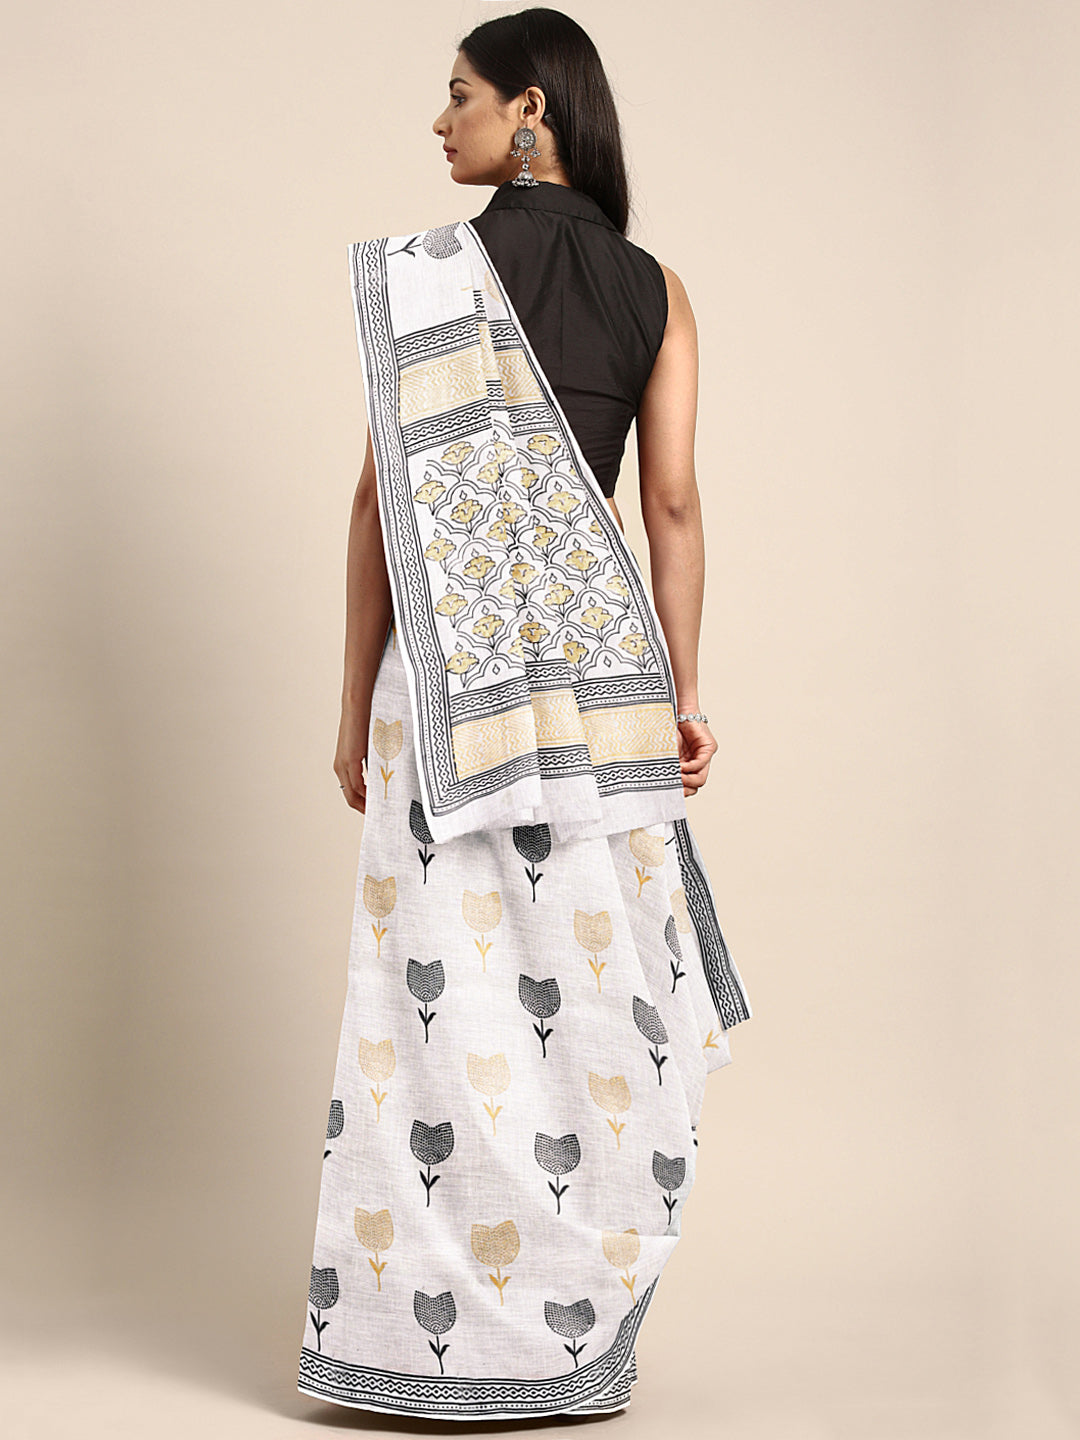 Off-White & Black Hand block Print Handcrafted Cotton Saree-Saree-Kalakari India-BAPASA0086-Cotton, Dabu, Geographical Indication, Hand Blocks, Hand Crafted, Heritage Prints, Sarees, Sustainable Fabrics-[Linen,Ethnic,wear,Fashionista,Handloom,Handicraft,Indigo,blockprint,block,print,Cotton,Chanderi,Blue, latest,classy,party,bollywood,trendy,summer,style,traditional,formal,elegant,unique,style,hand,block,print, dabu,booti,gift,present,glamorous,affordable,collectible,Sari,Saree,printed, holi, Diw